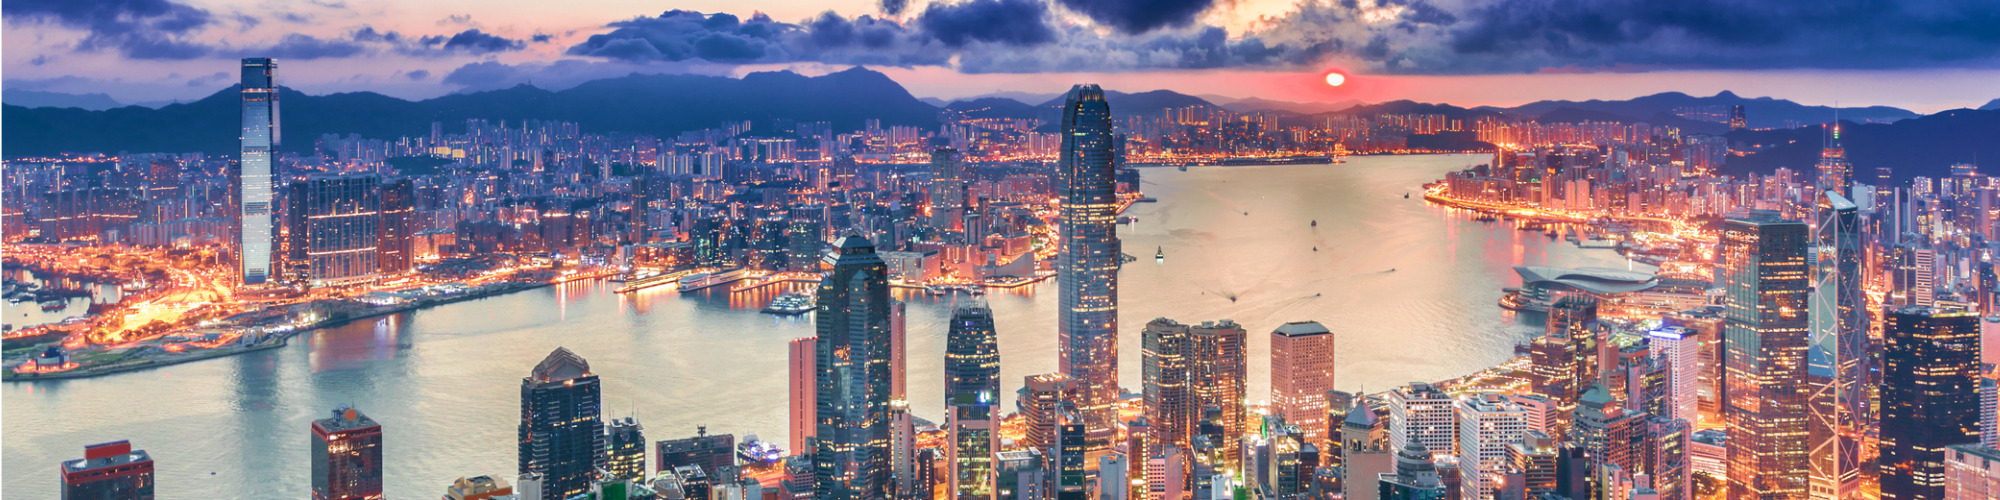 Trading with Hong Kong - Key Considerations & Guidance - Live at Your Desk 